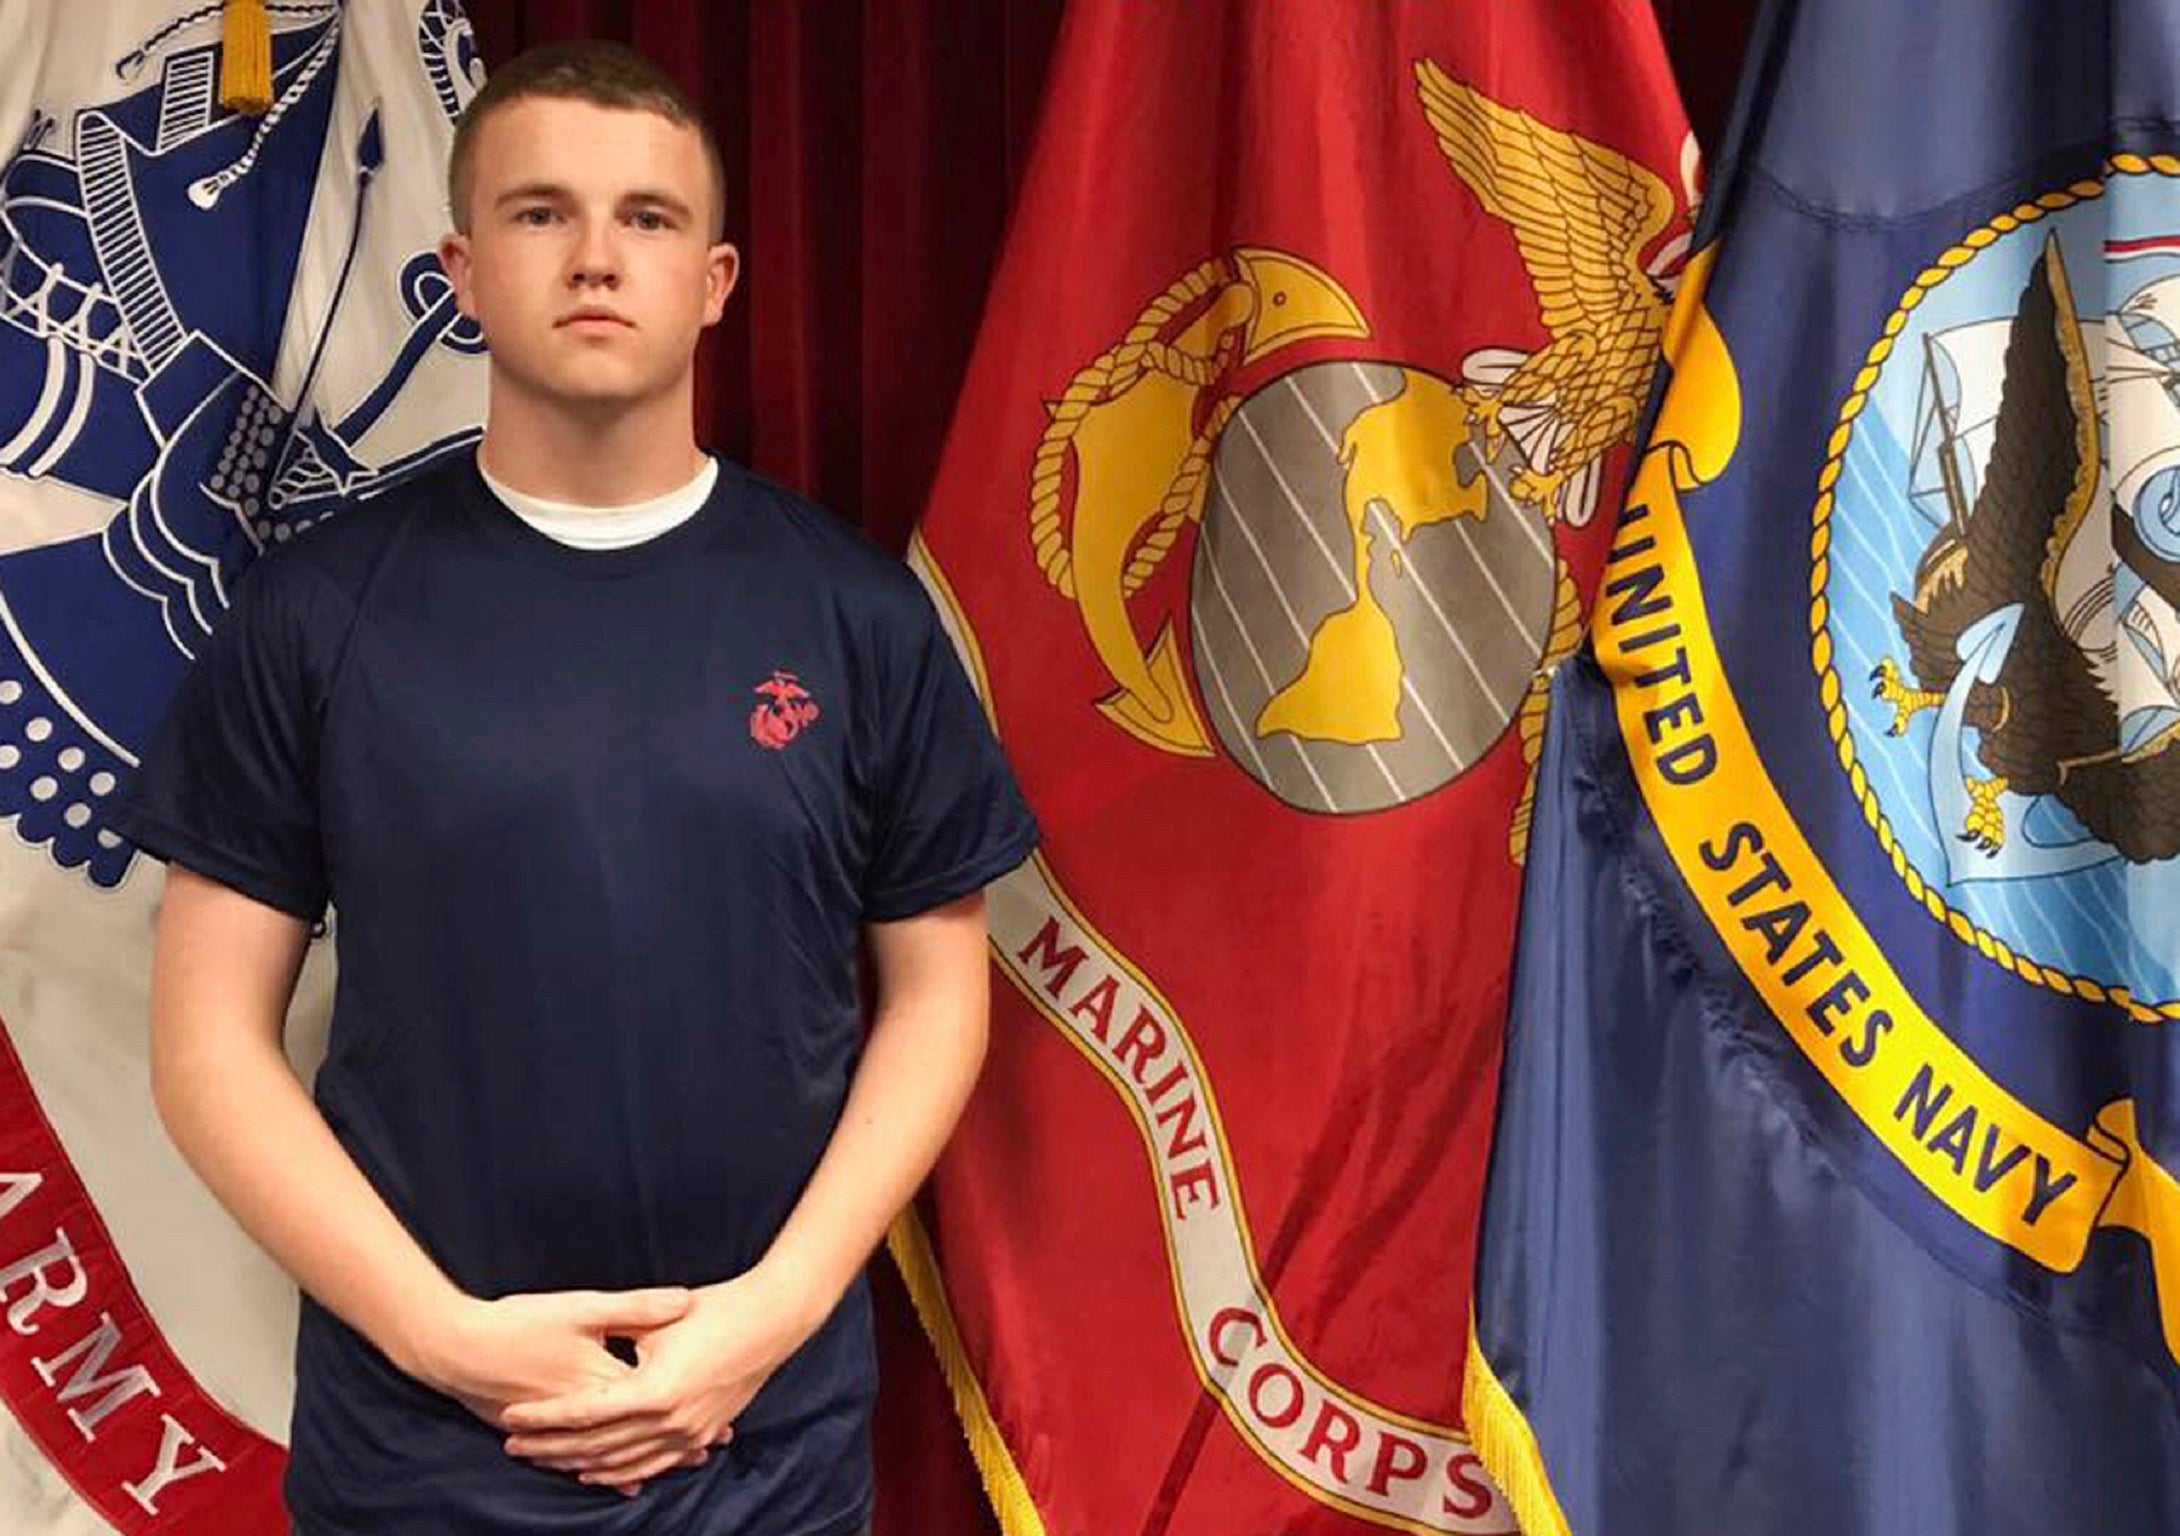 Tyler Jarell joined the US Marines a week before the Ohio State Fair accident